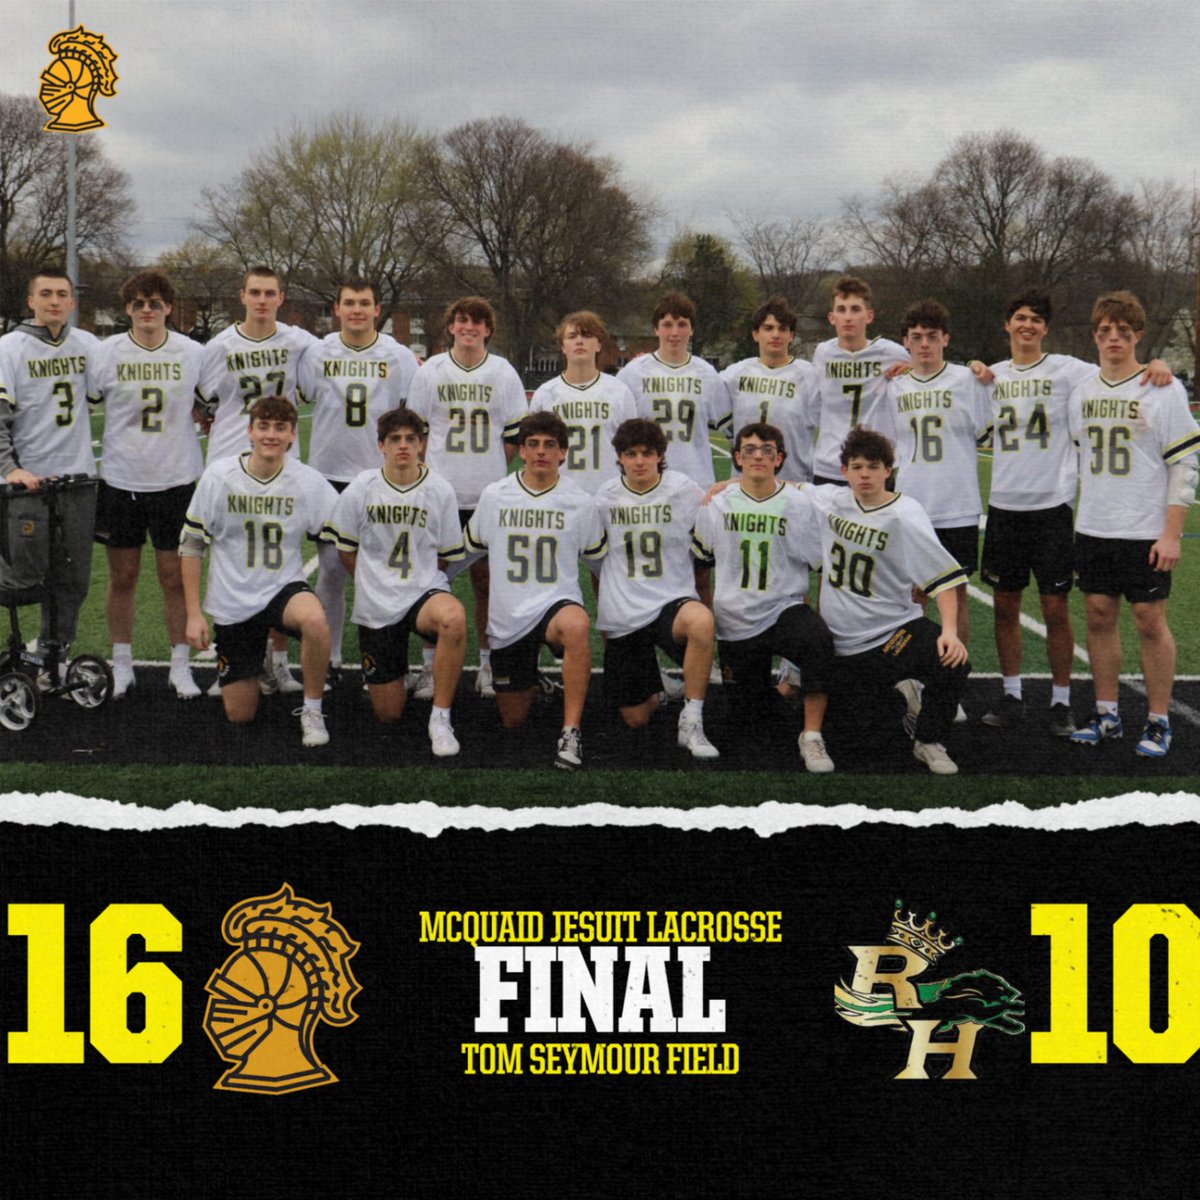 Knights Win! Senior night success and the team moves to 8-0 on the season. Next up for the Knights is a road game Saturday morning at Canisius at 11AM. #AMDG #thankyouseniors @mcquaidjesuit @secvboyslax